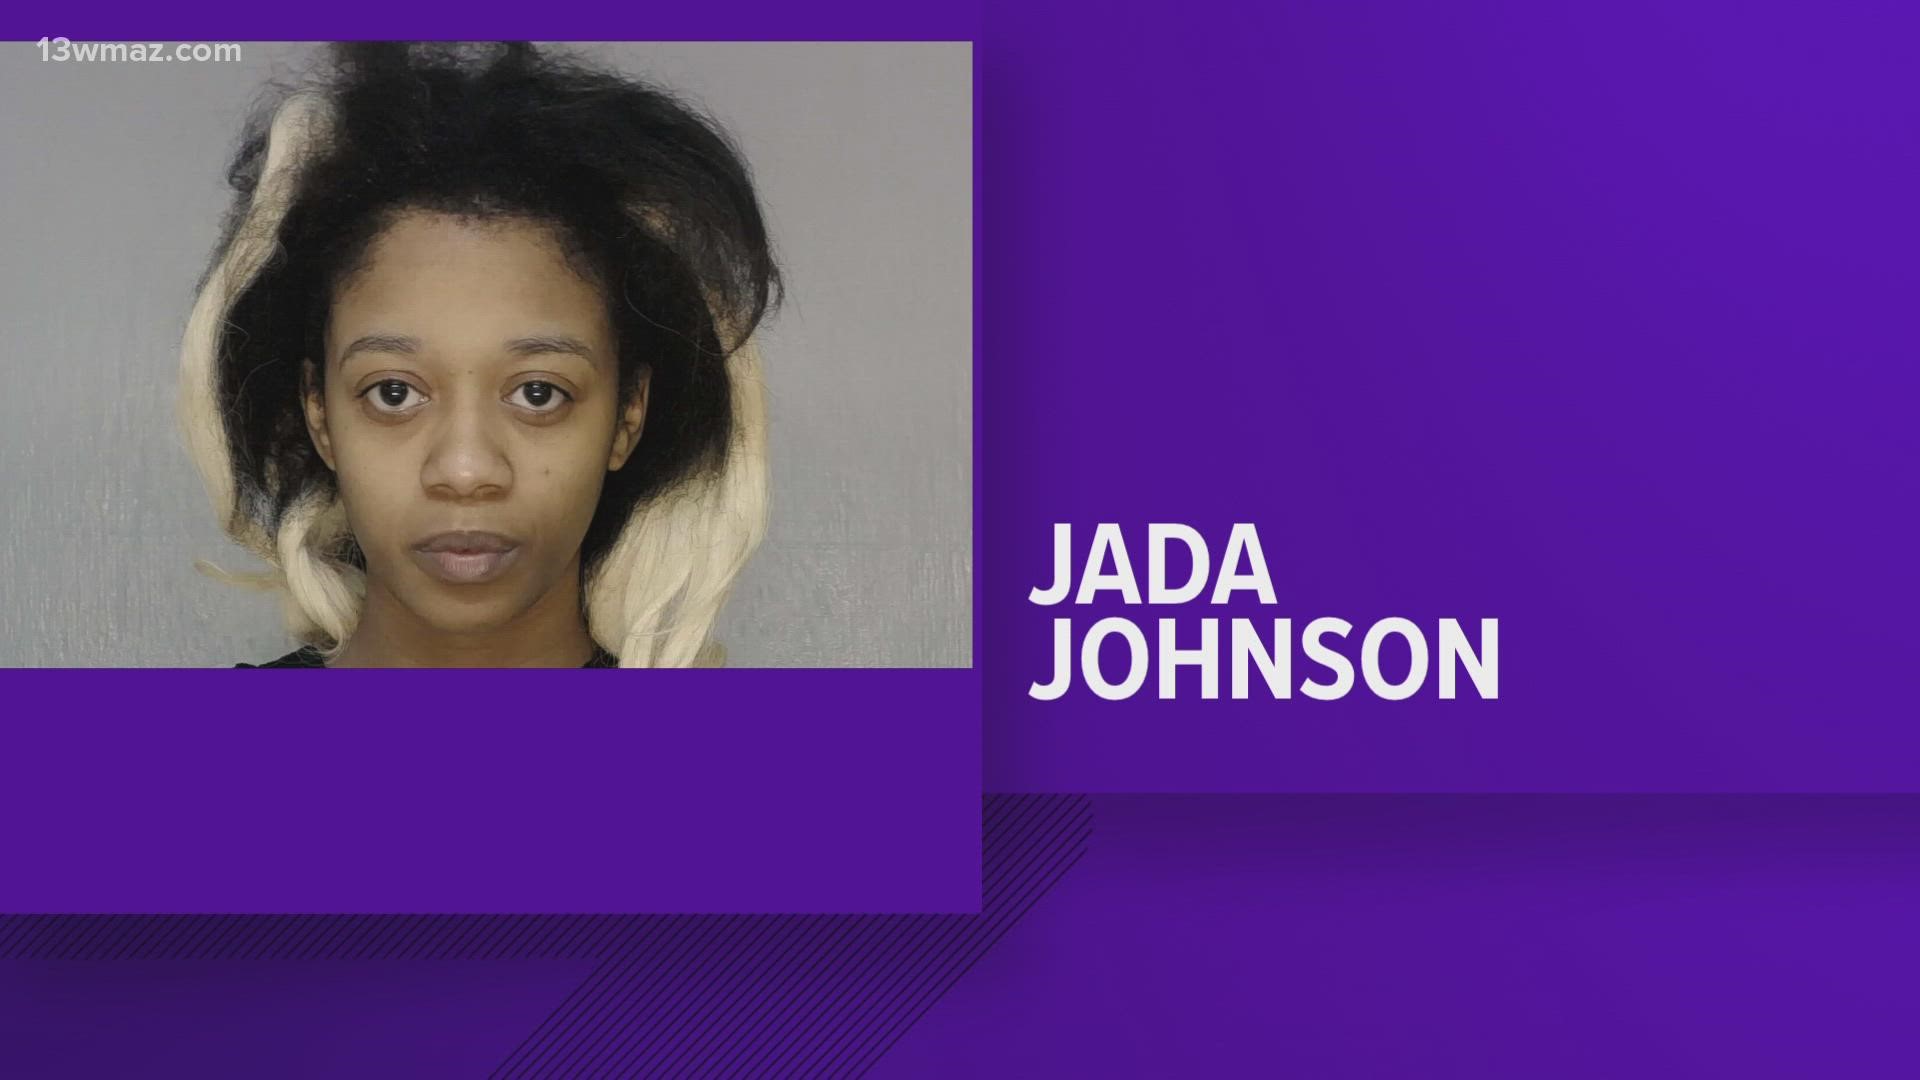 The Sheriff's Office says the woman was taken to the Bibb County Law Enforcement Center, where she is being charged.